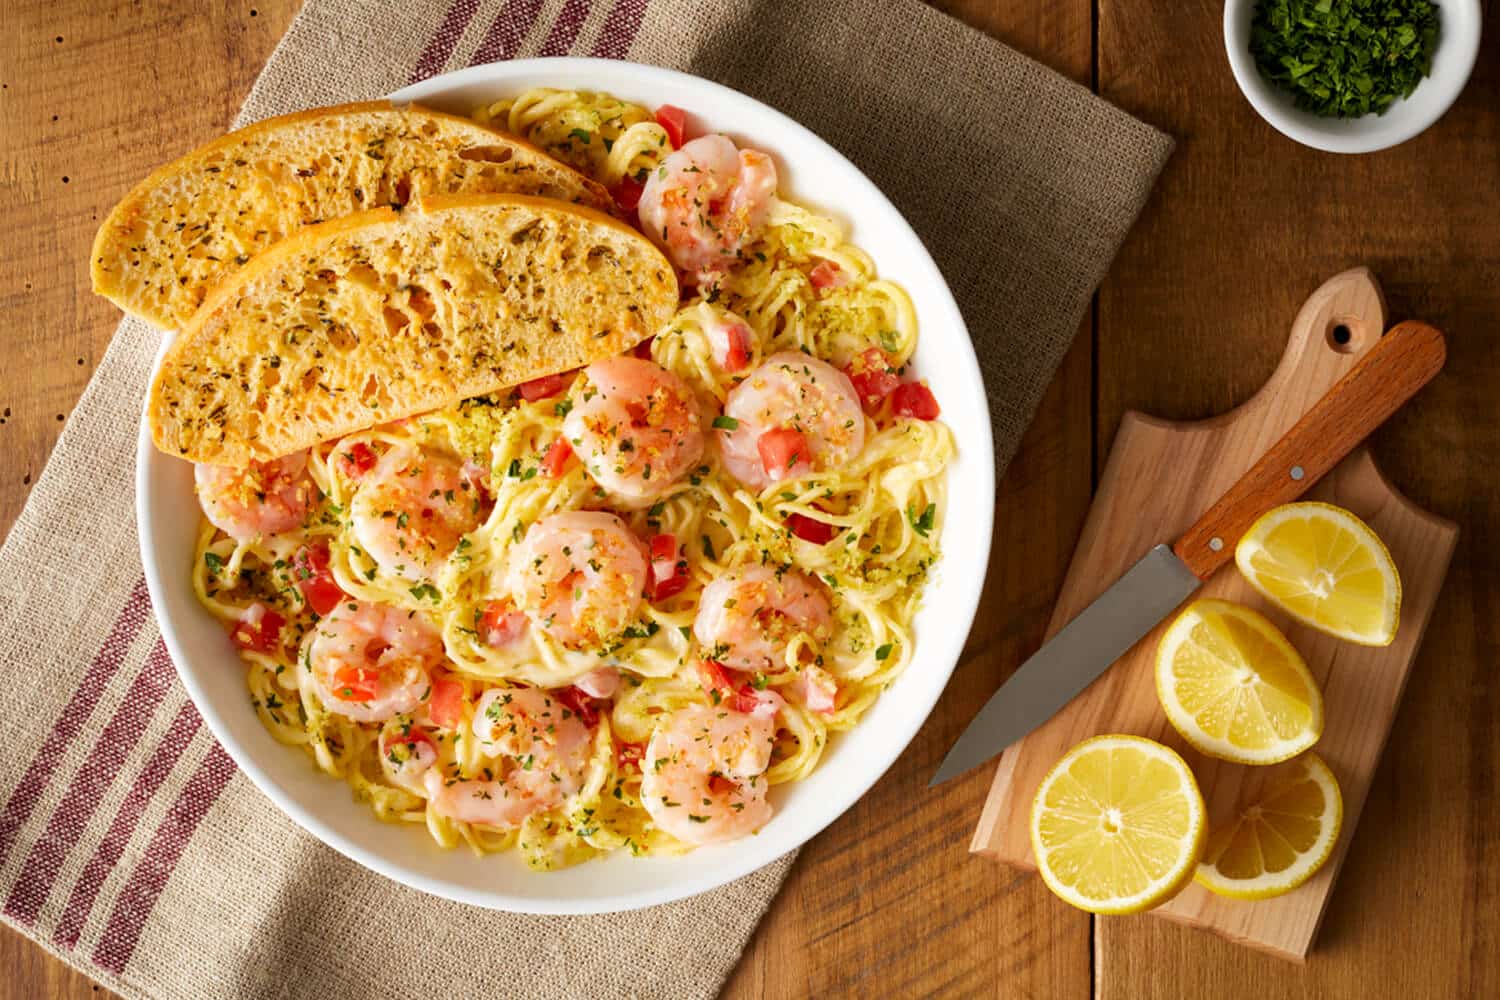 Shrimp Scampi plated with garlic bread and sliced lemons on the side from Bravo